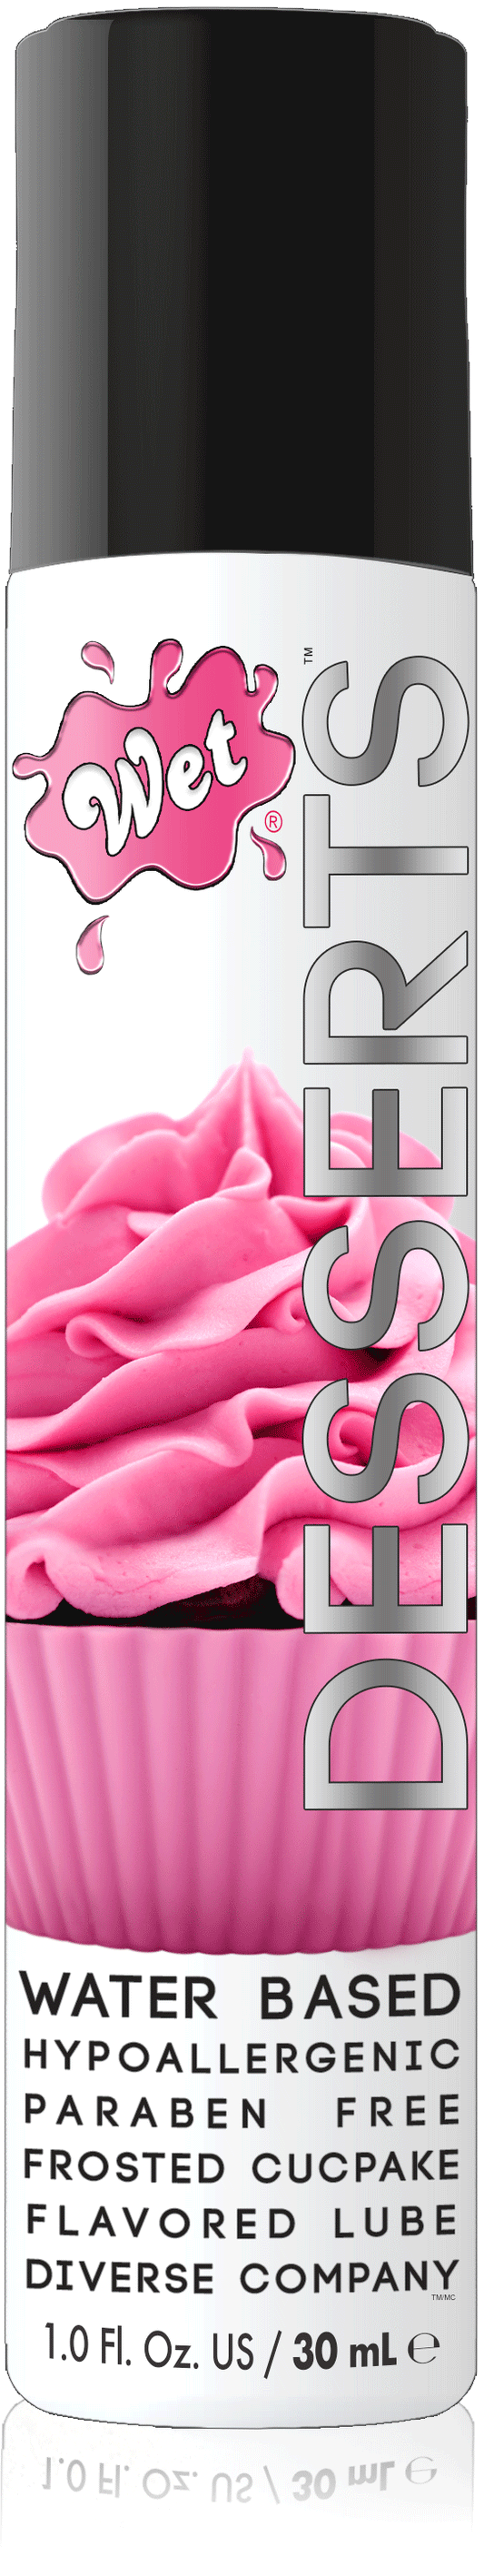 Wet Desserts Frosted Cupcake - 1 Fl. Oz. - My Sex Toy Hub